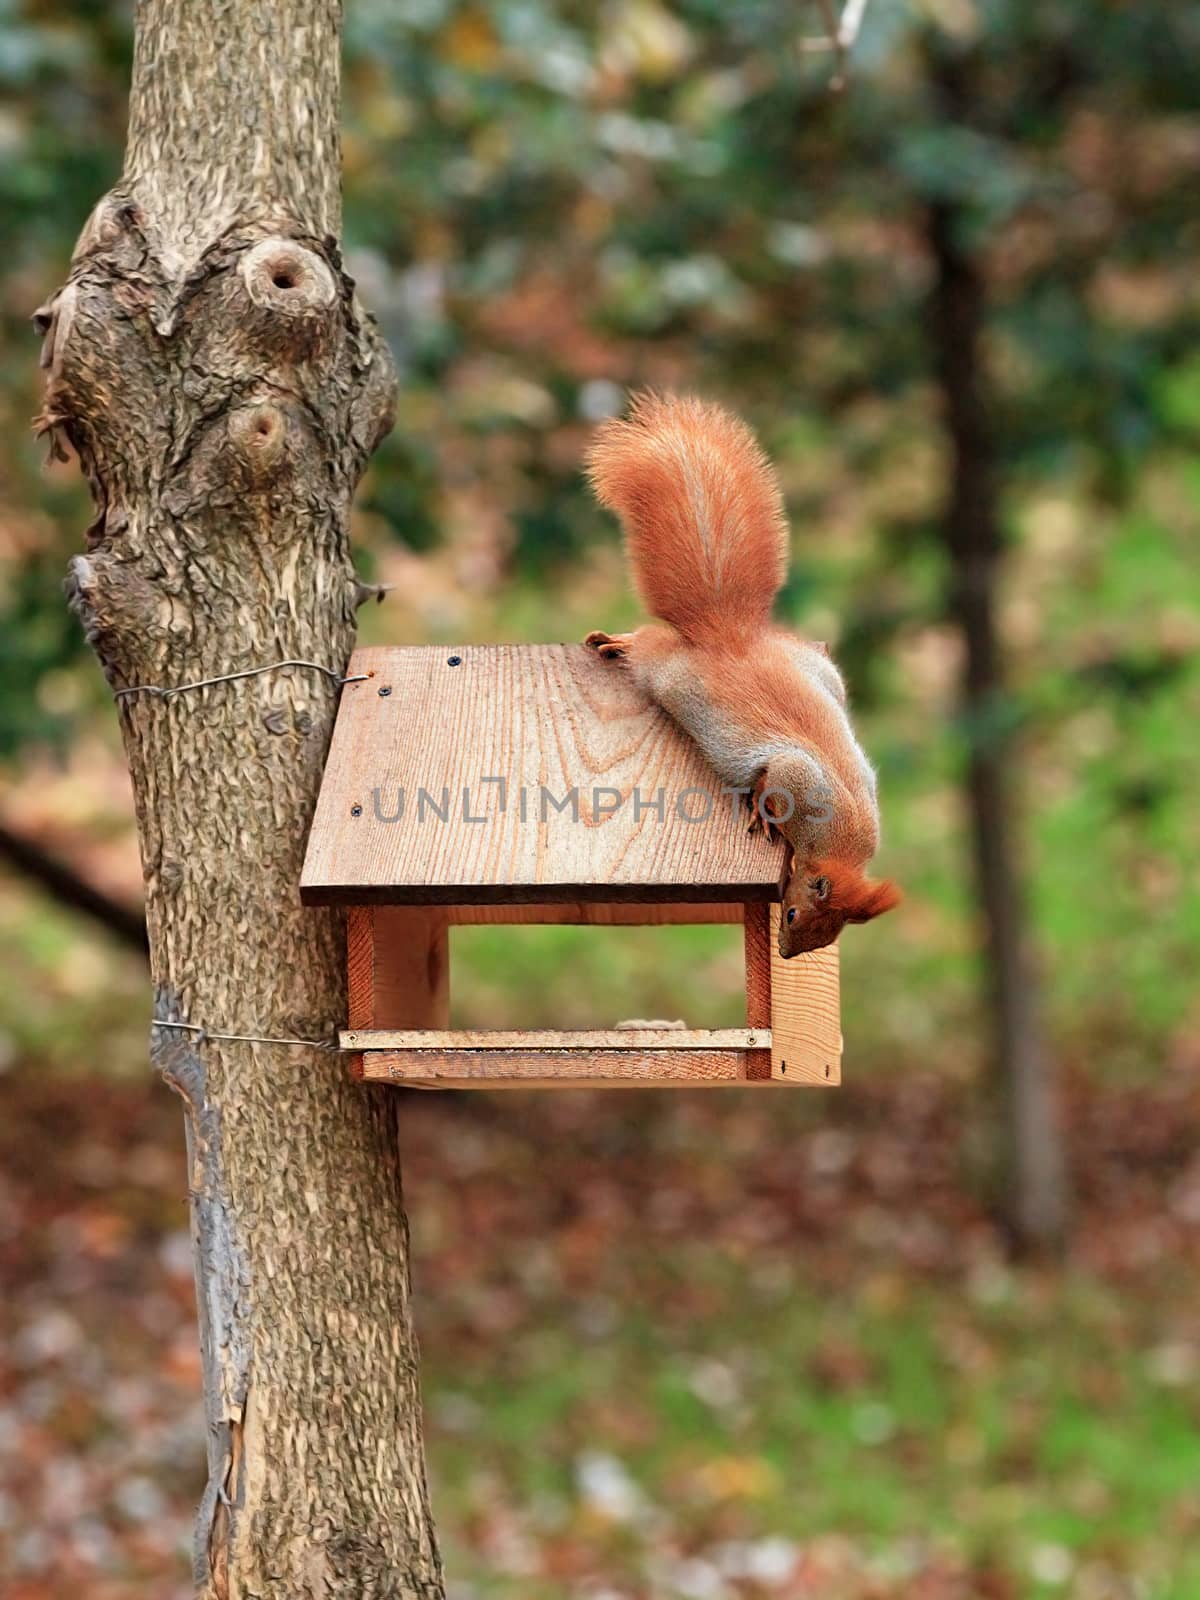 Cute little orange squirrel peeps into a bird feeder tied to a tree in a city park. by Sergii